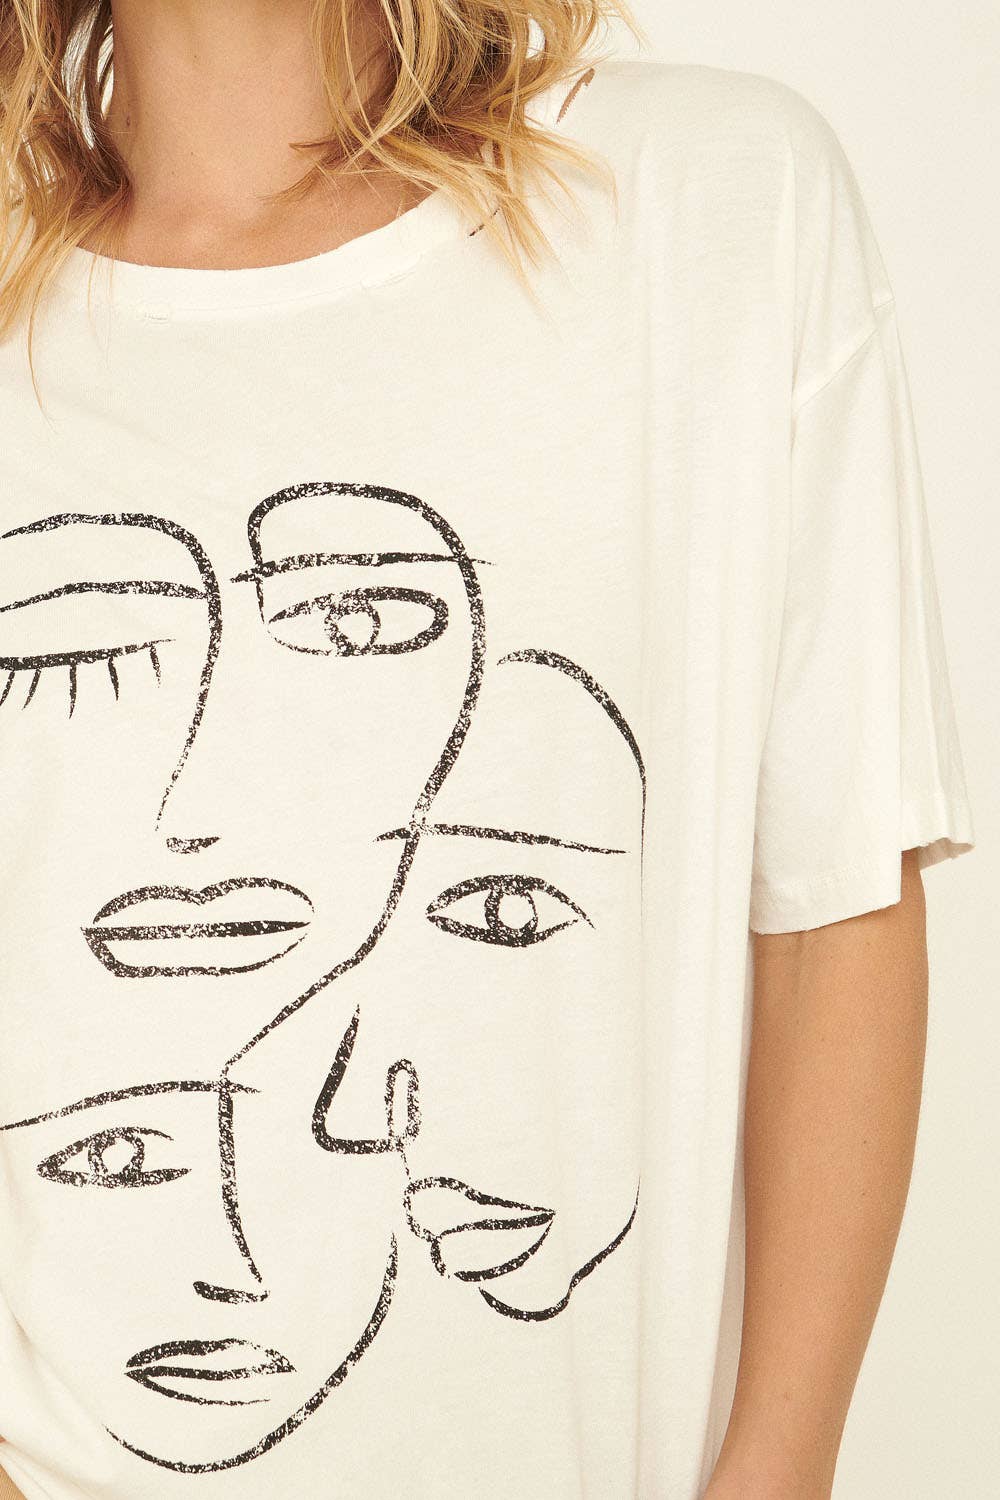 Mineral Washed Abstract Faces Graphic Tee